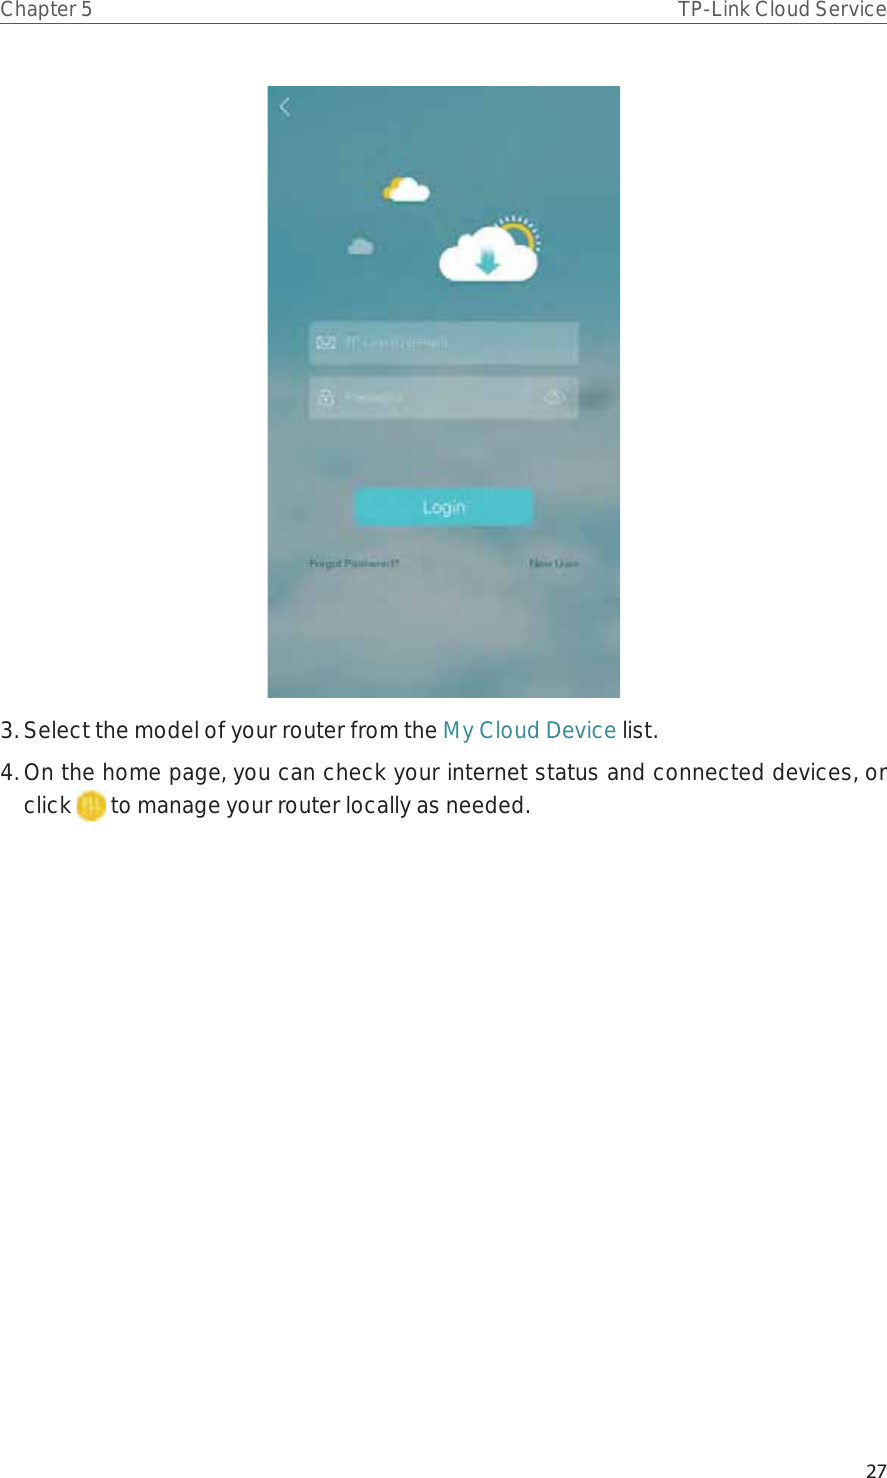 27Chapter 5 TP-Link Cloud Service3. Select the model of your router from the My Cloud Device list.4. On the home page, you can check your internet status and connected devices, or click   to manage your router locally as needed.